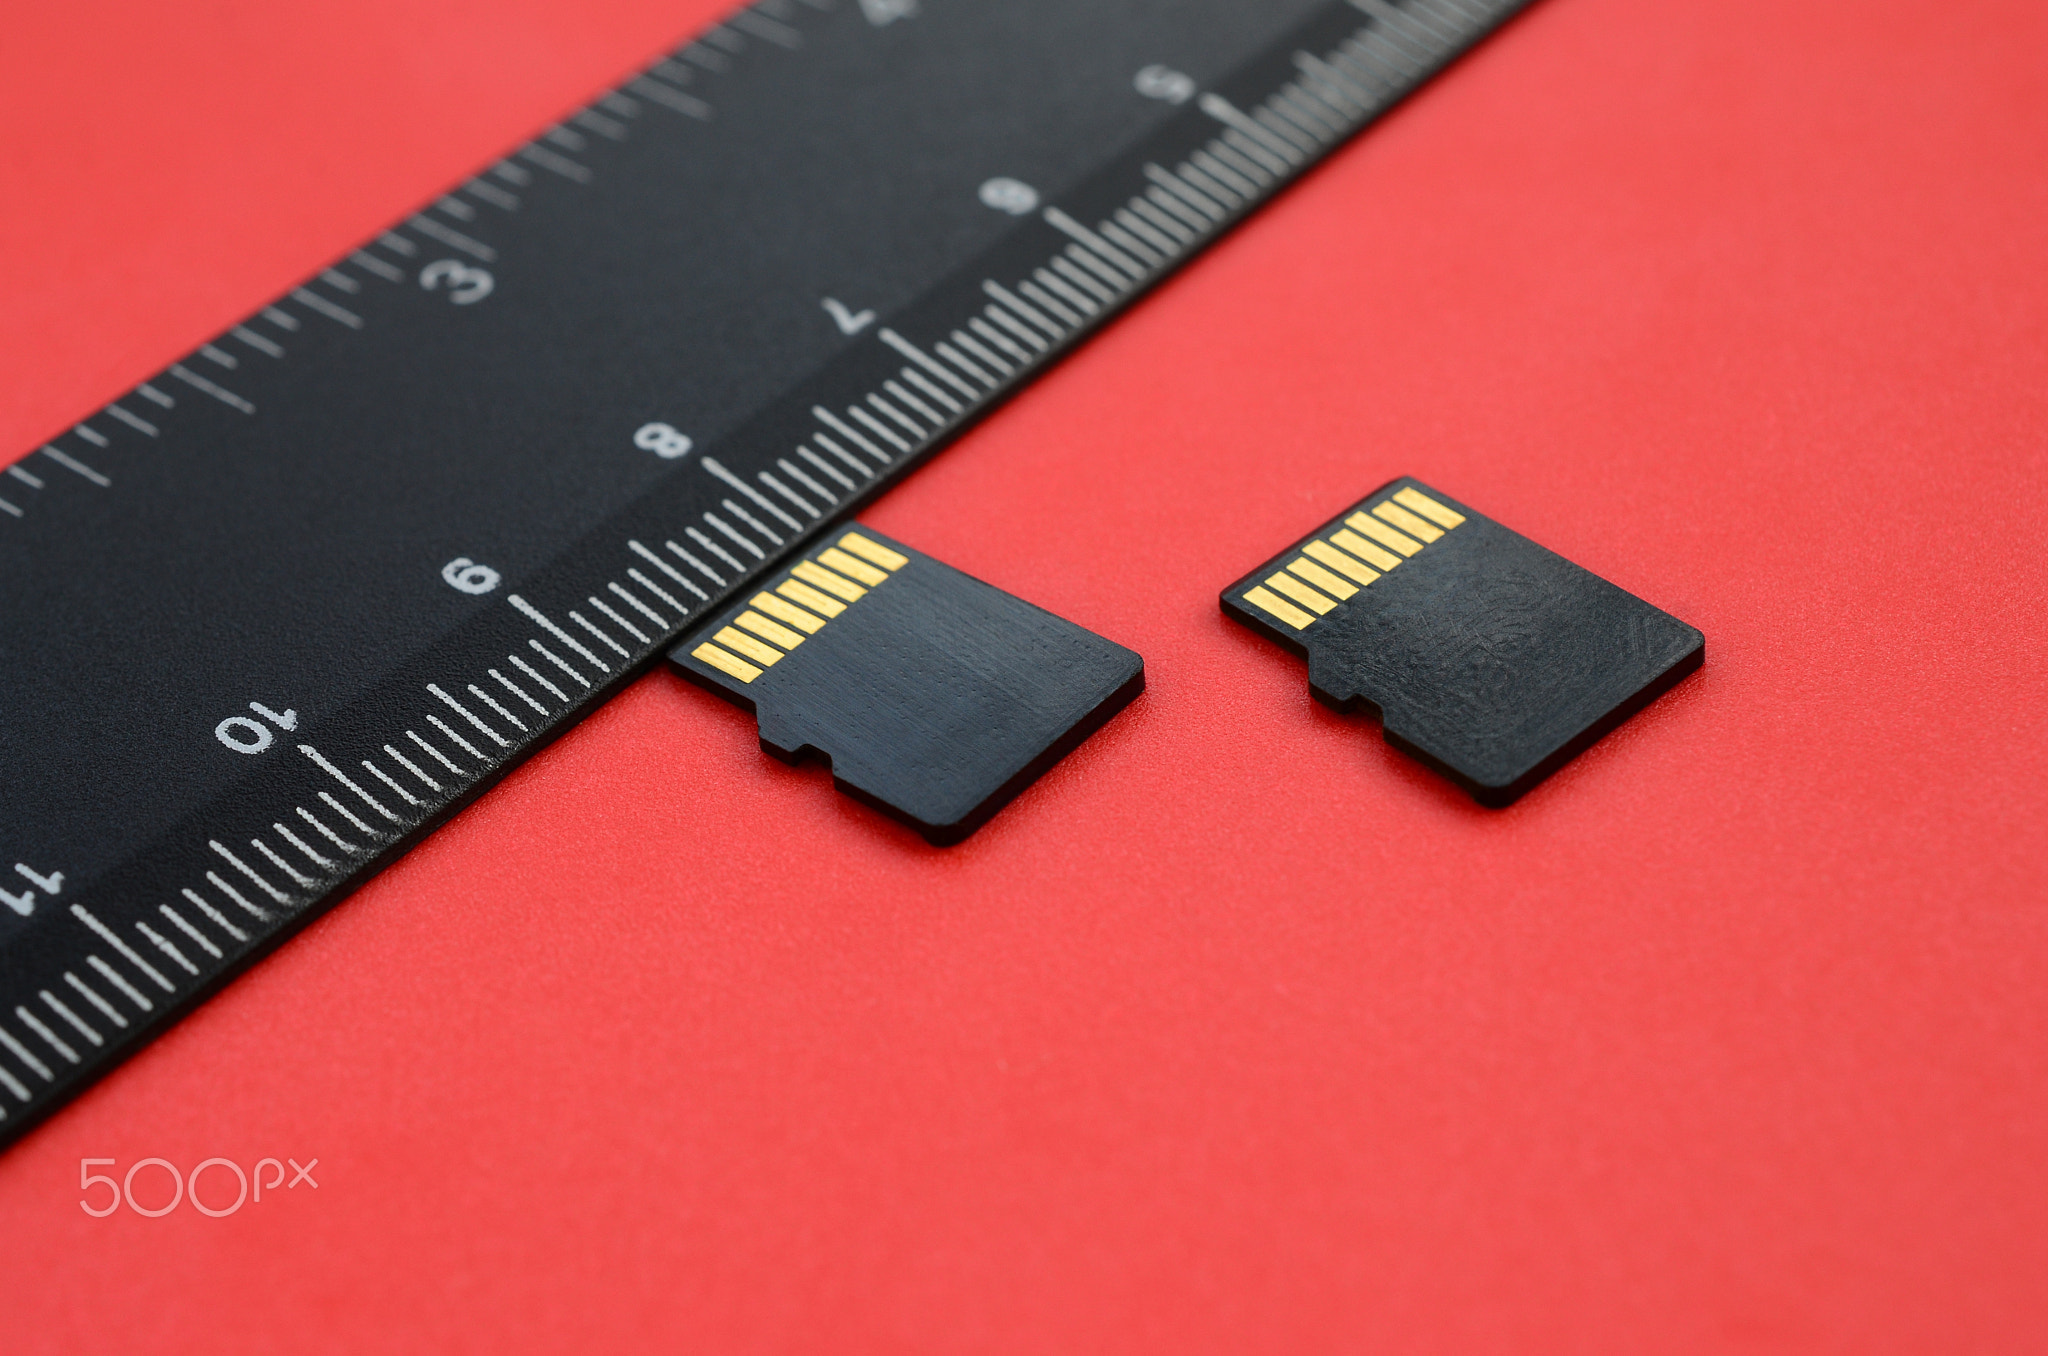 Two small micro SD memory cards lie on a red background next to a black ruler. A small and compact